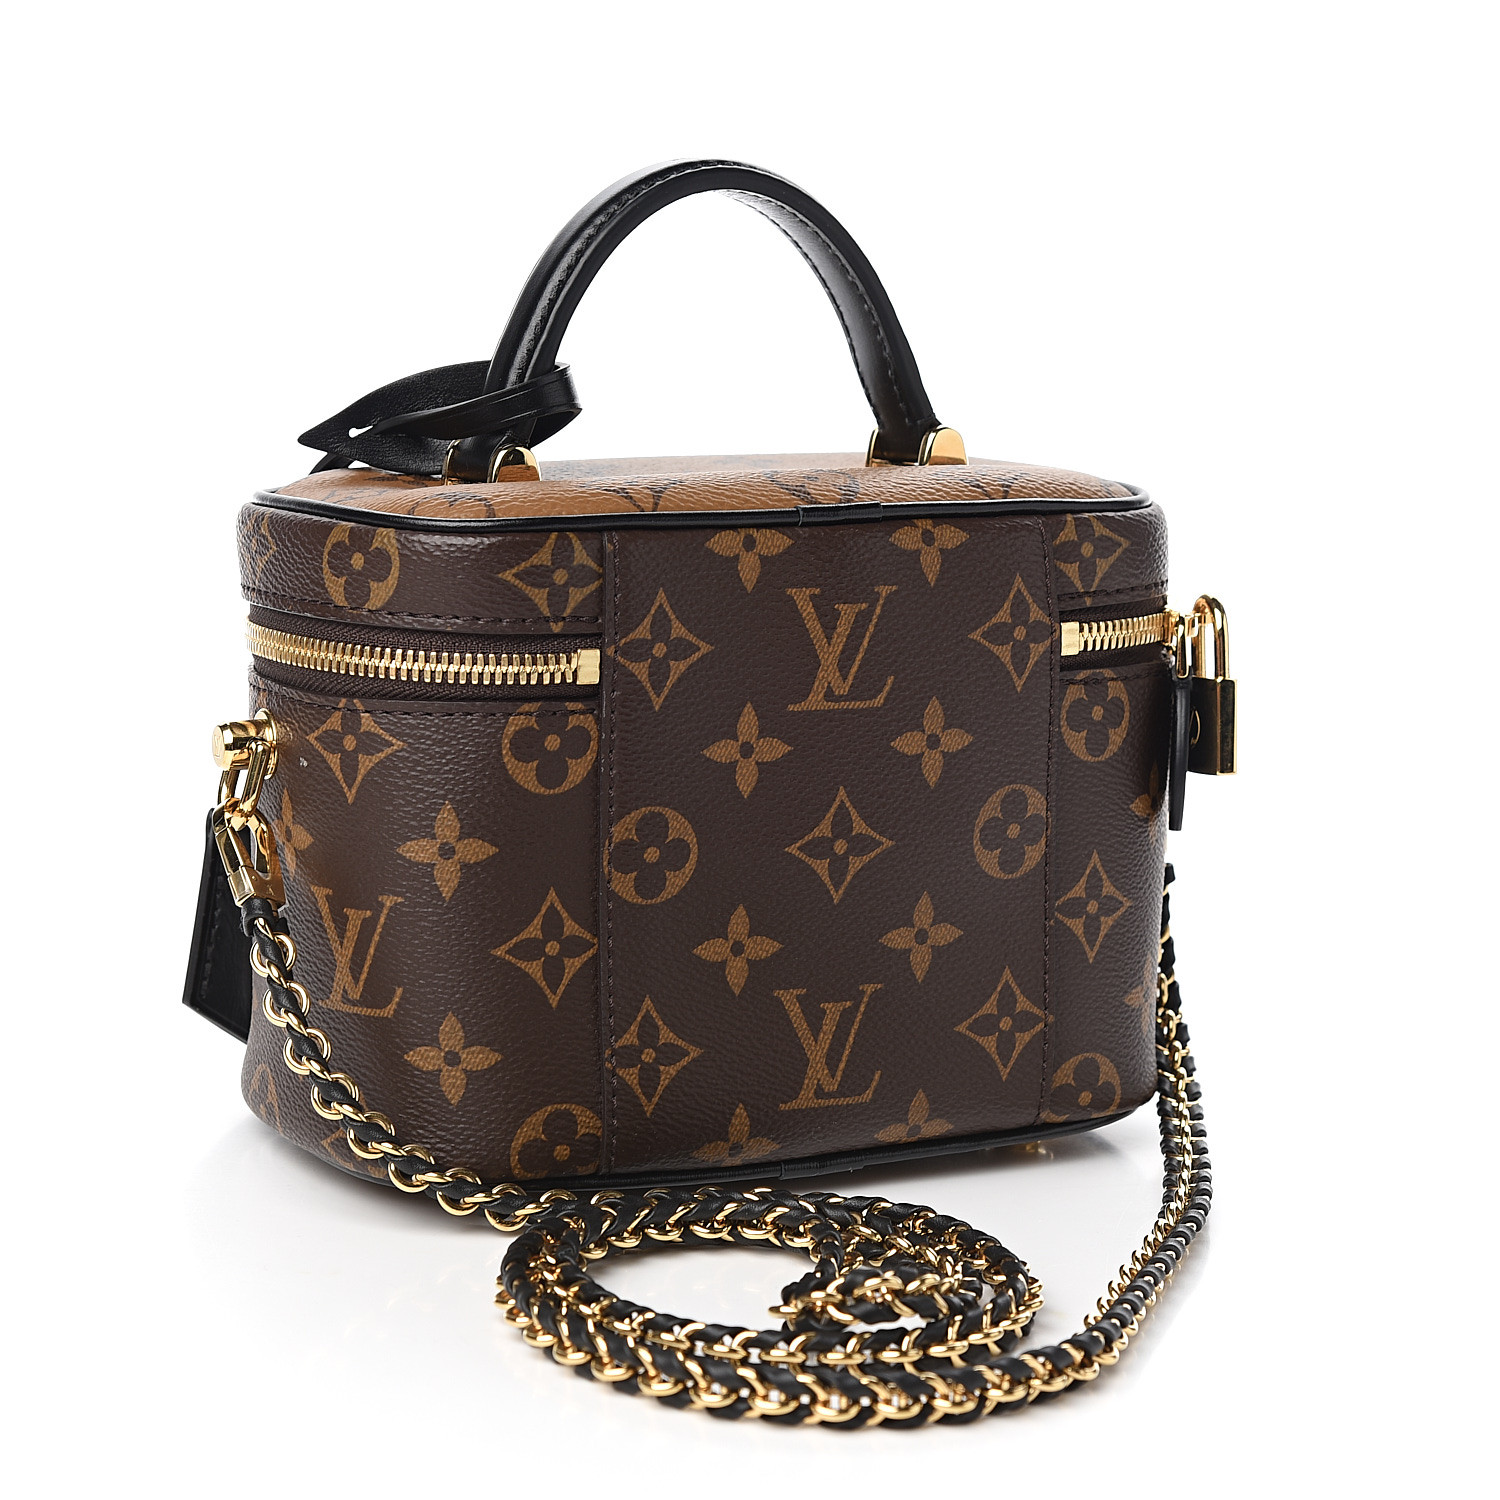 lv vanity pm outfit